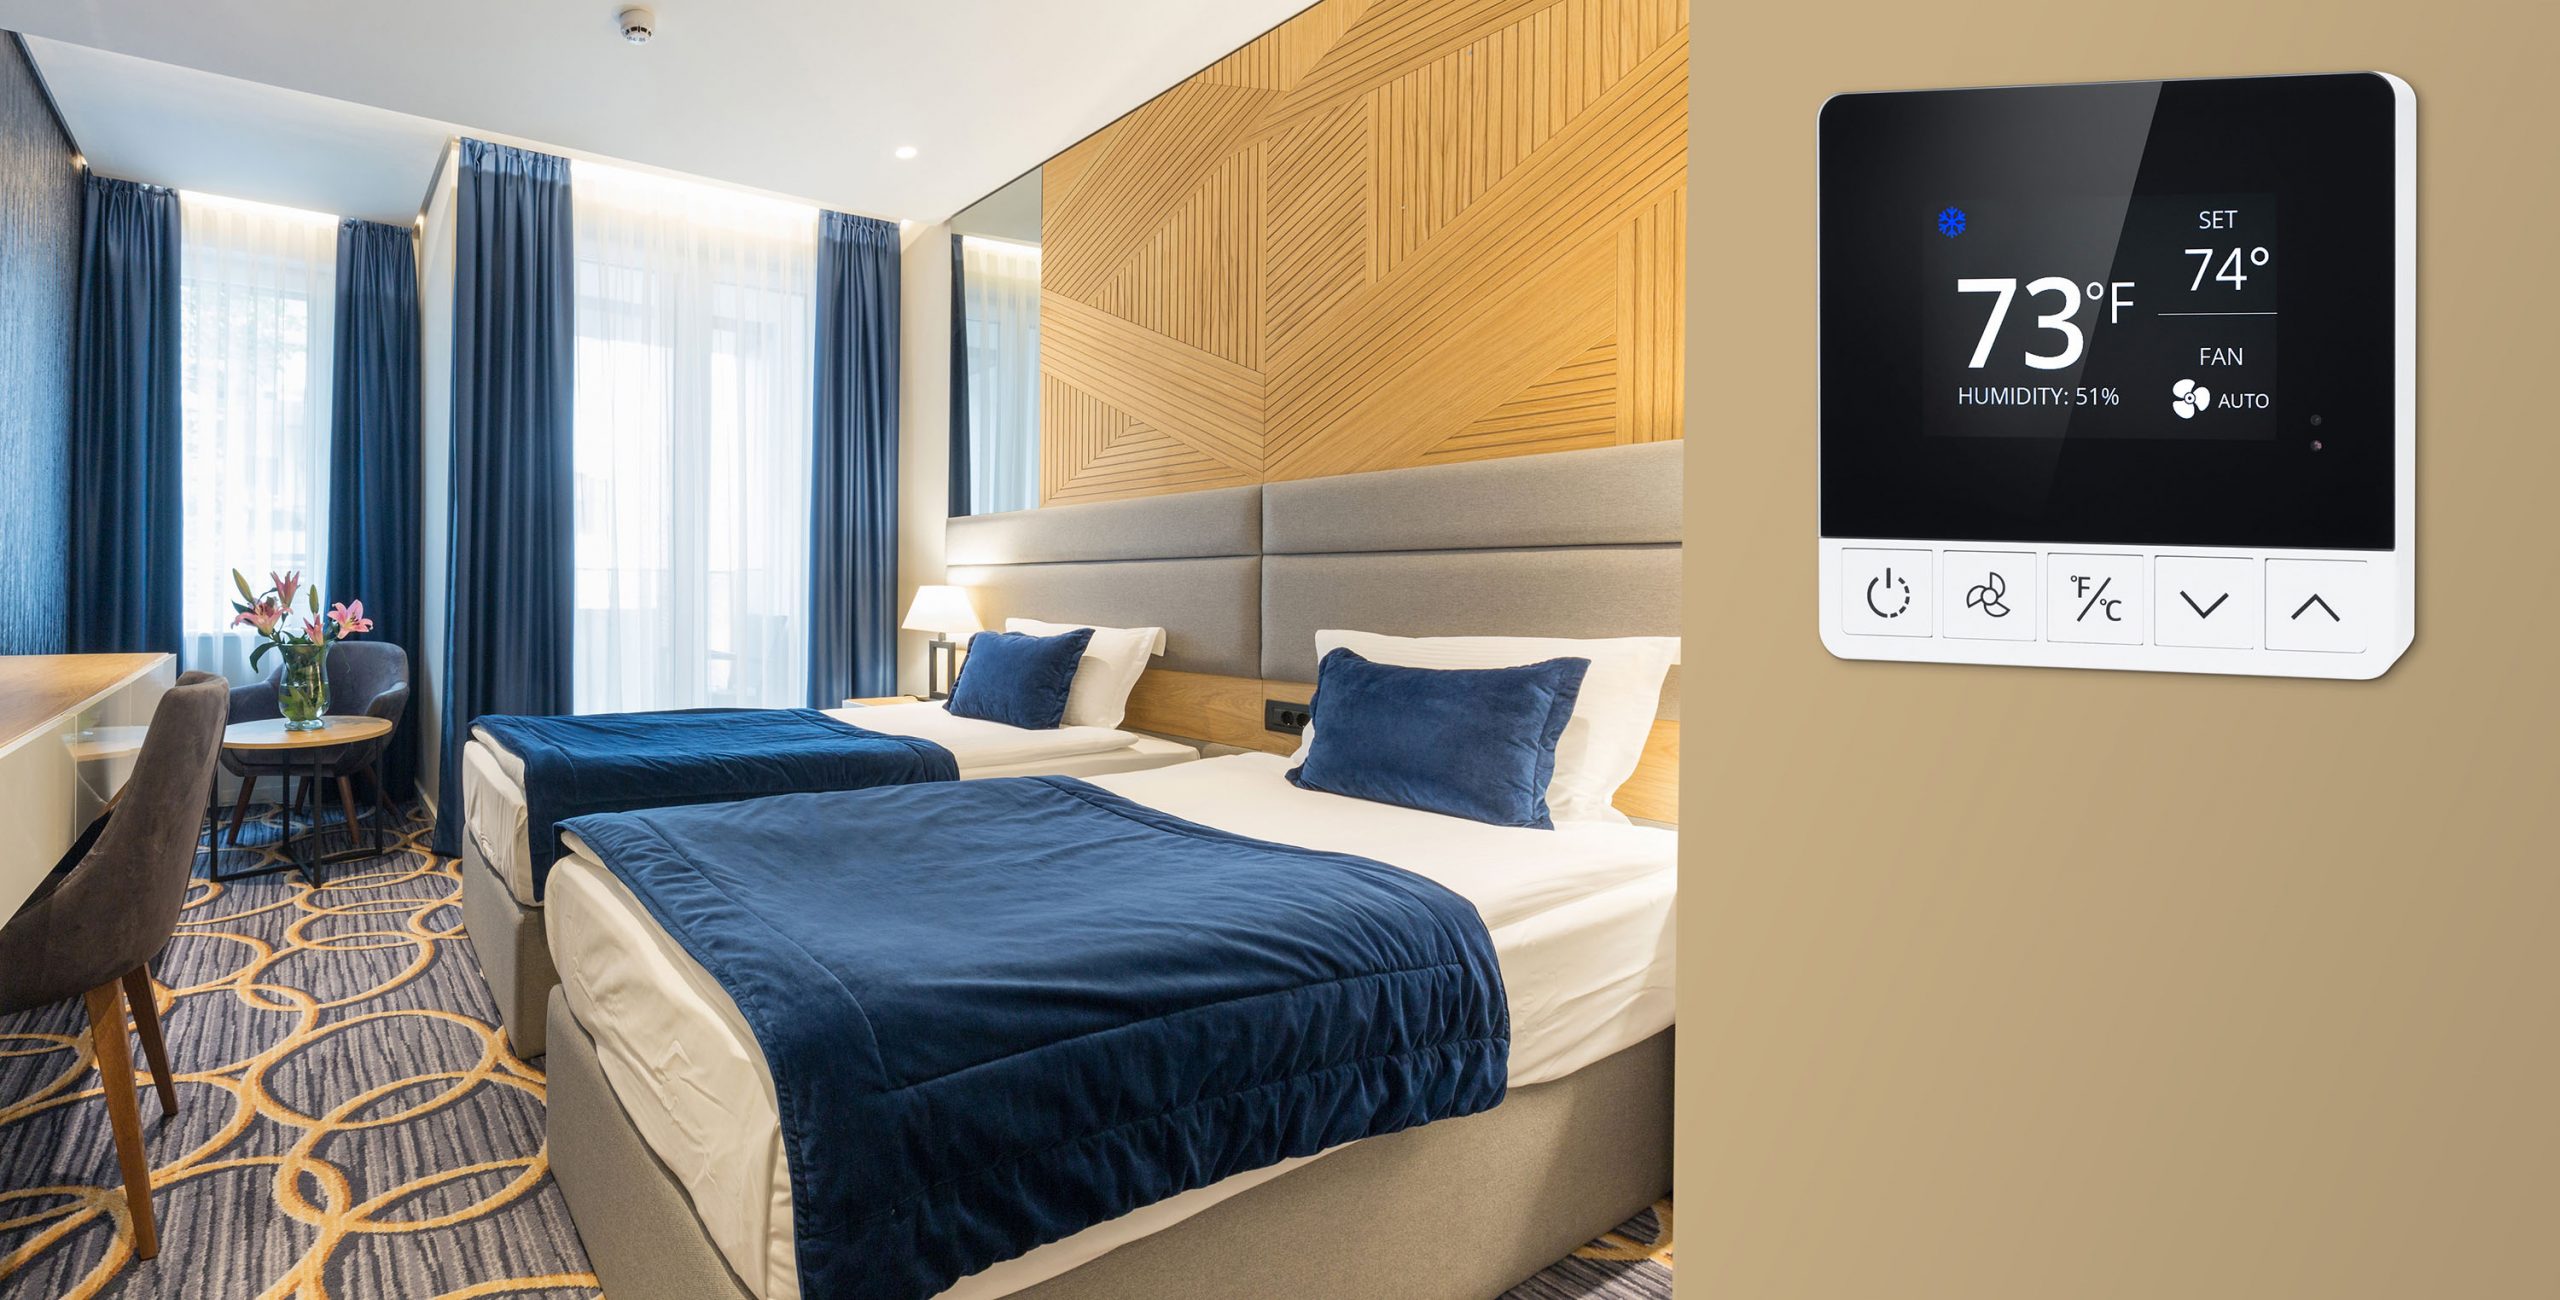 Bodhi makes Lutron CodeSmart even smarter by bringing room to the target temperature before the guest arrives